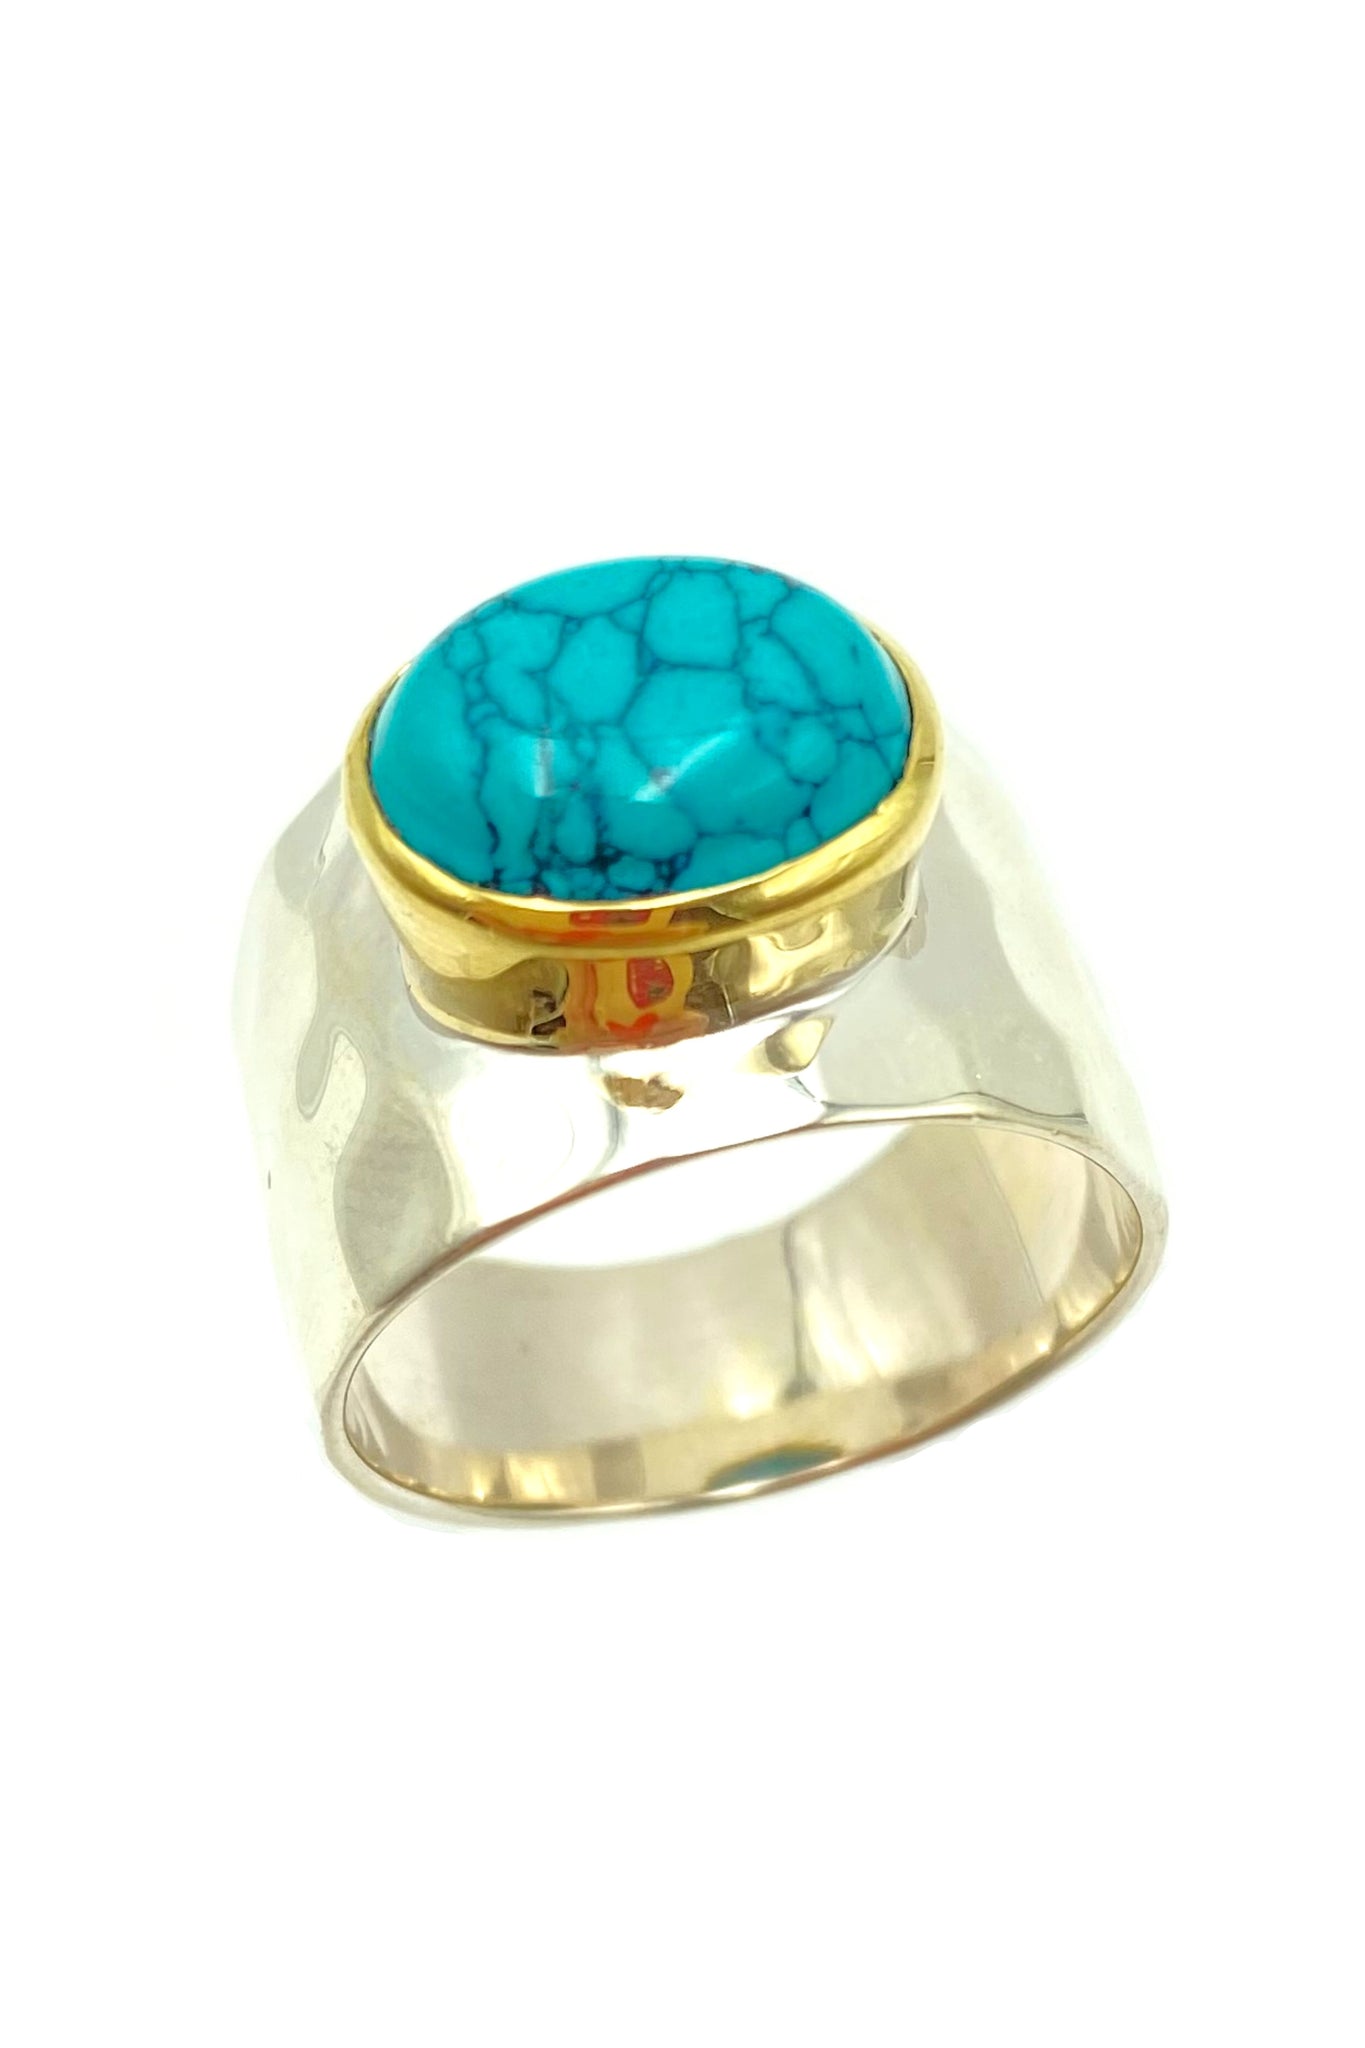 Turquoise Hammered Ring - Silver 925